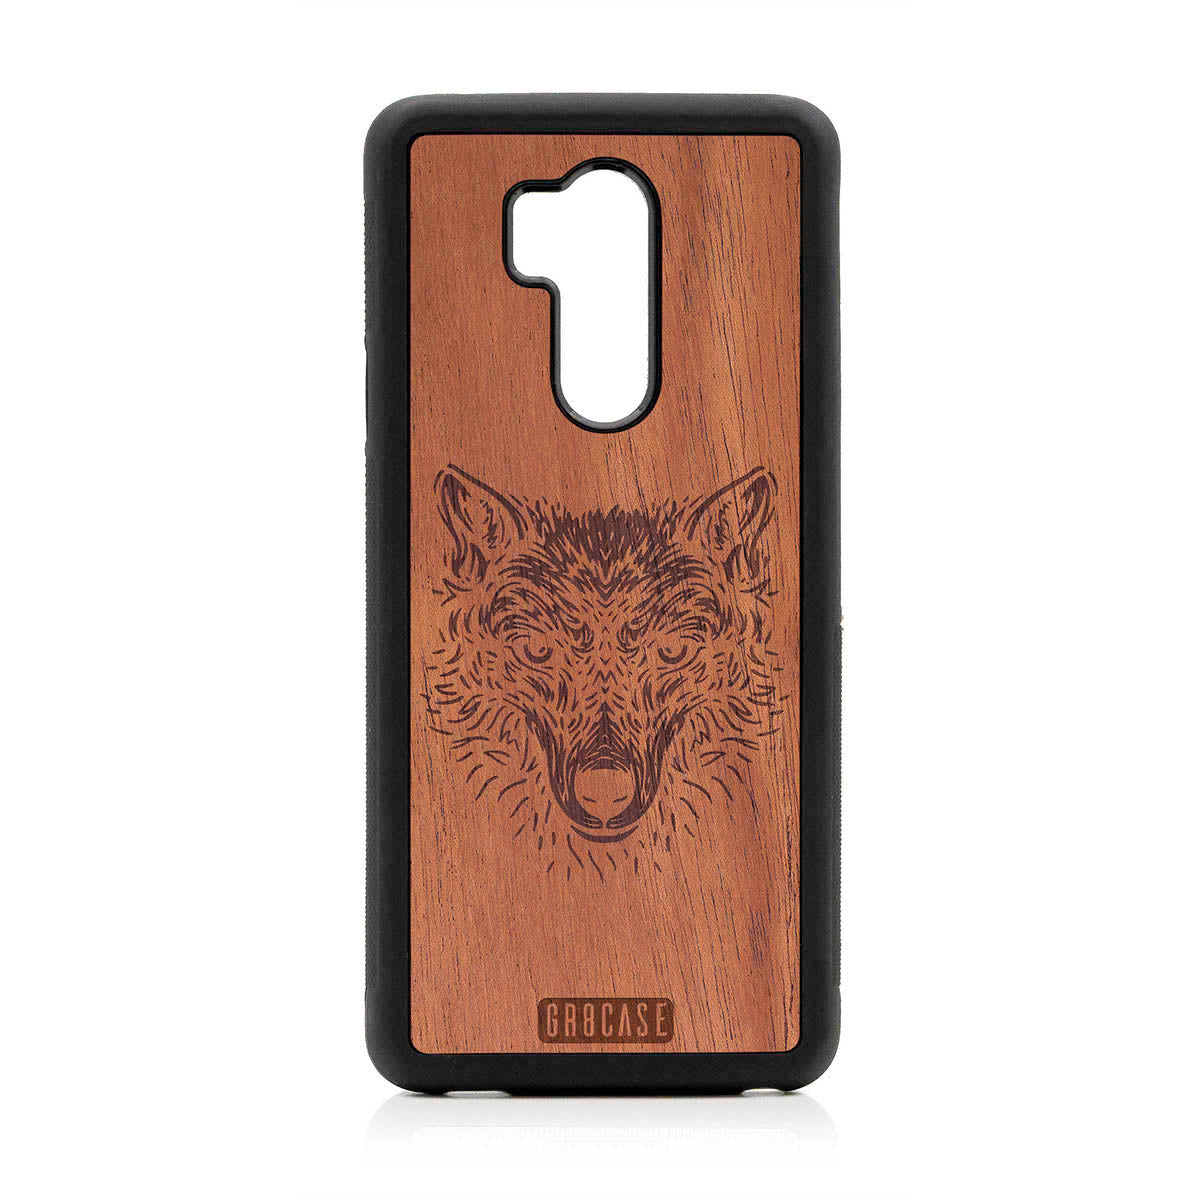 Furry Wolf Design Wood Case For LG G7 ThinQ